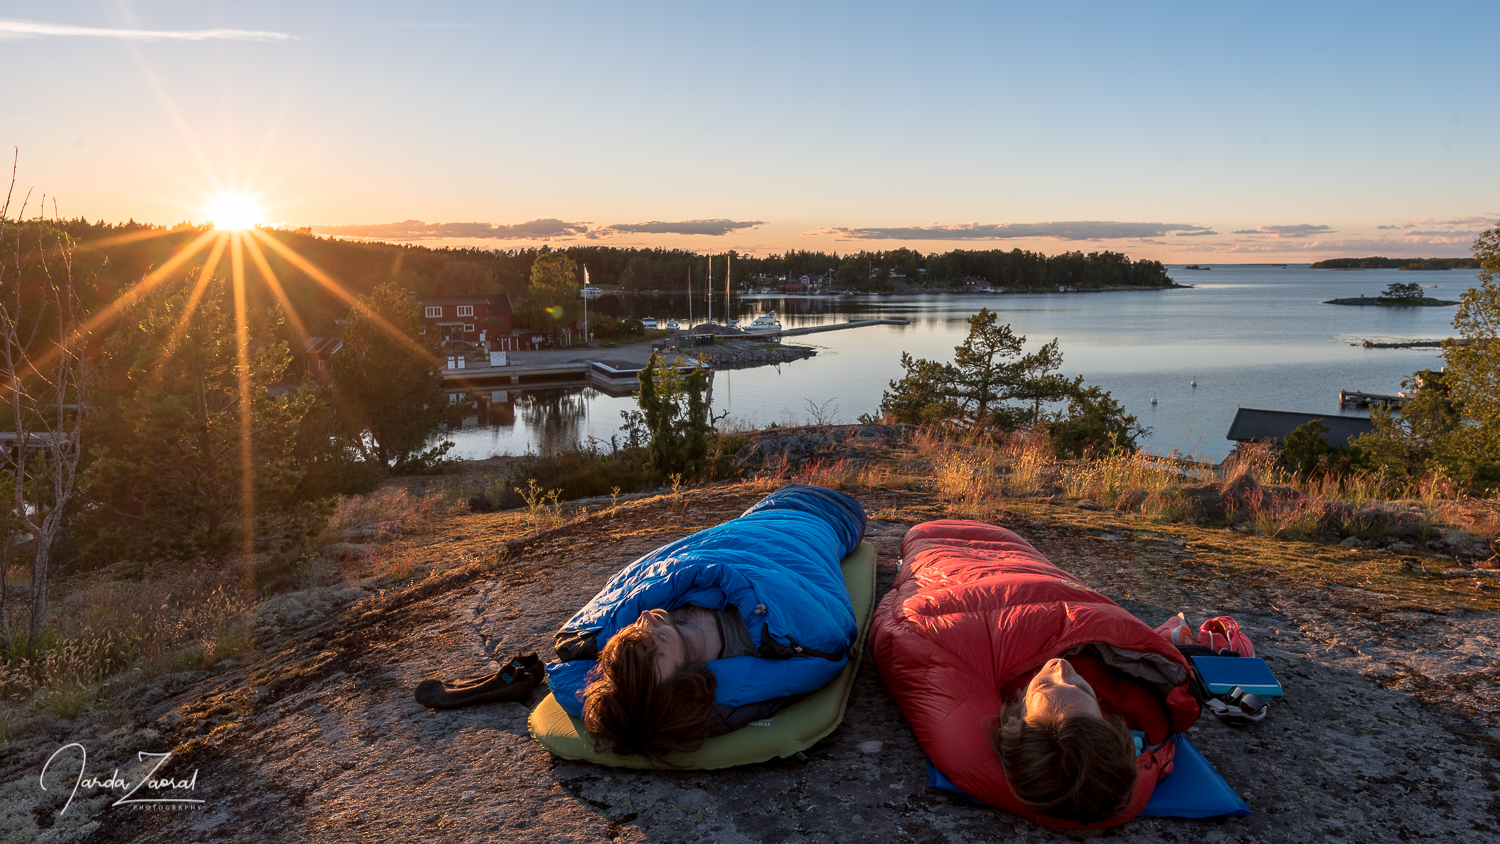 Two tourists chilling during sunrise in their sleeping bags on a Swedish island